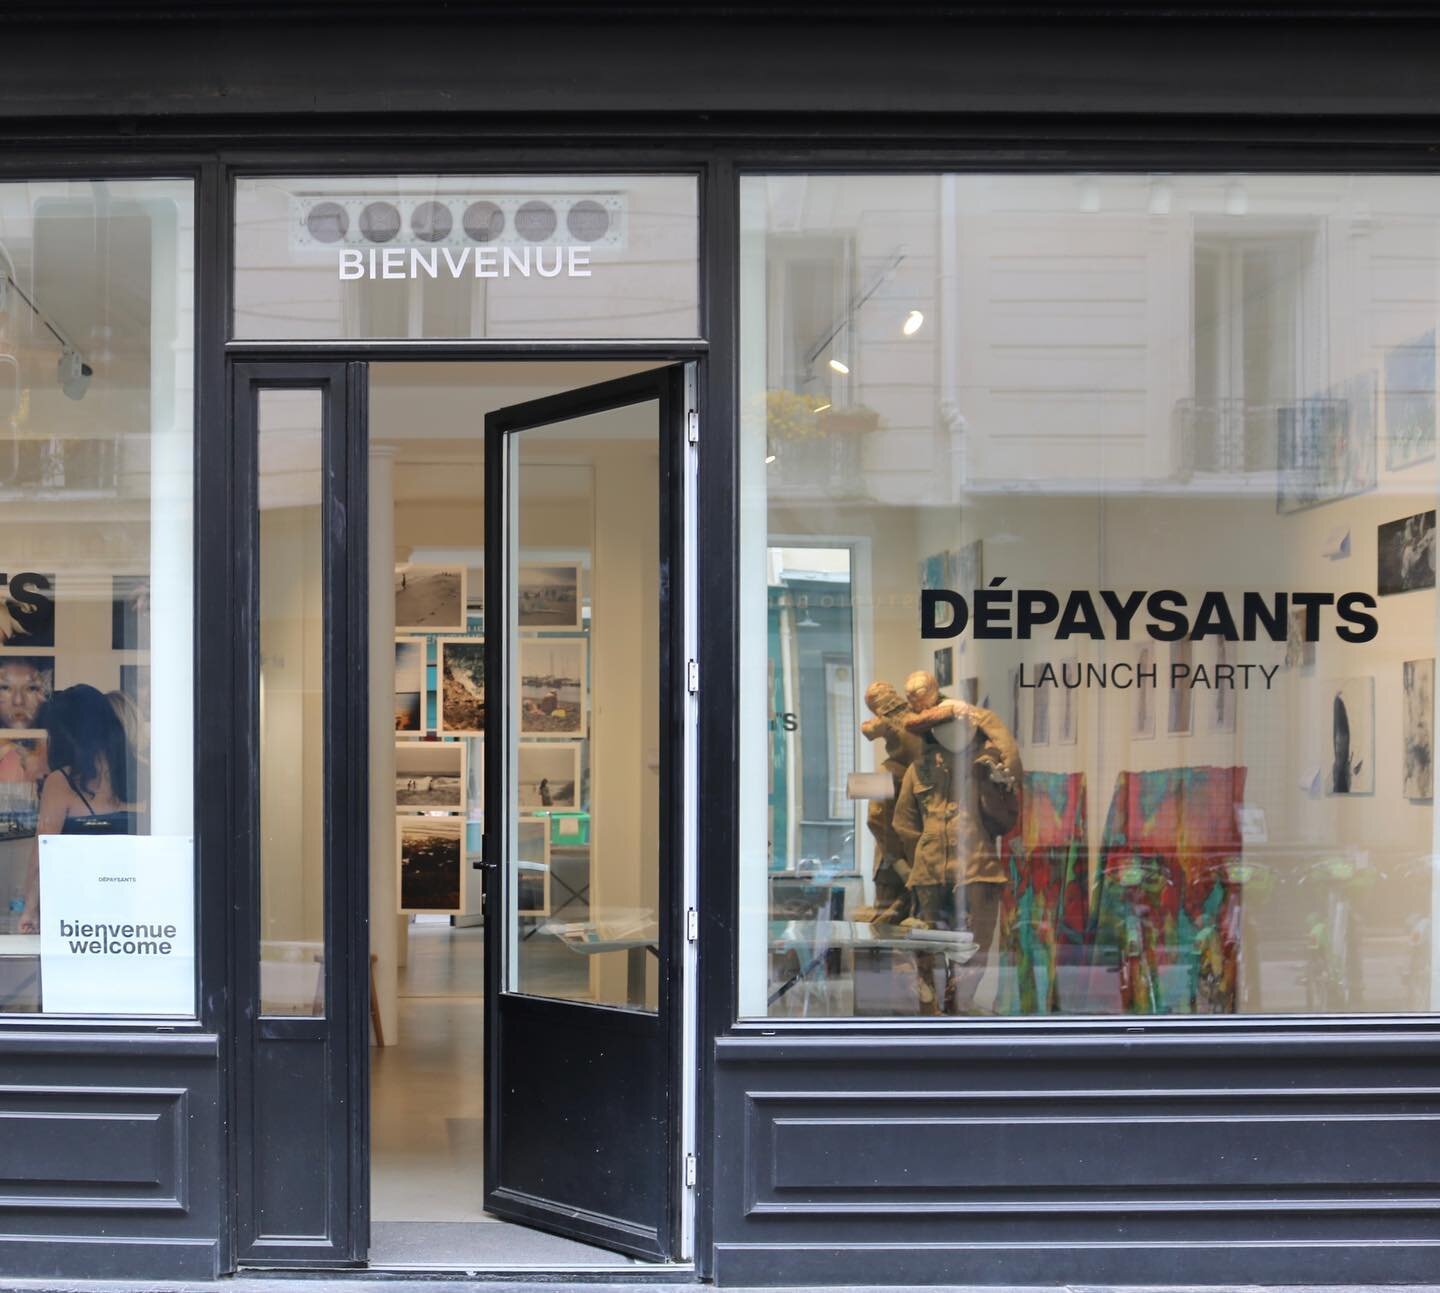 A week ago 🤍

Thank you for joining us in our first pop-up gallery. A huge thanks to the artists who came and agreed to exhibit their work as well. We look forward to holding more events like this in the future! 

With love, D&Eacute;PAYSANTS team
.